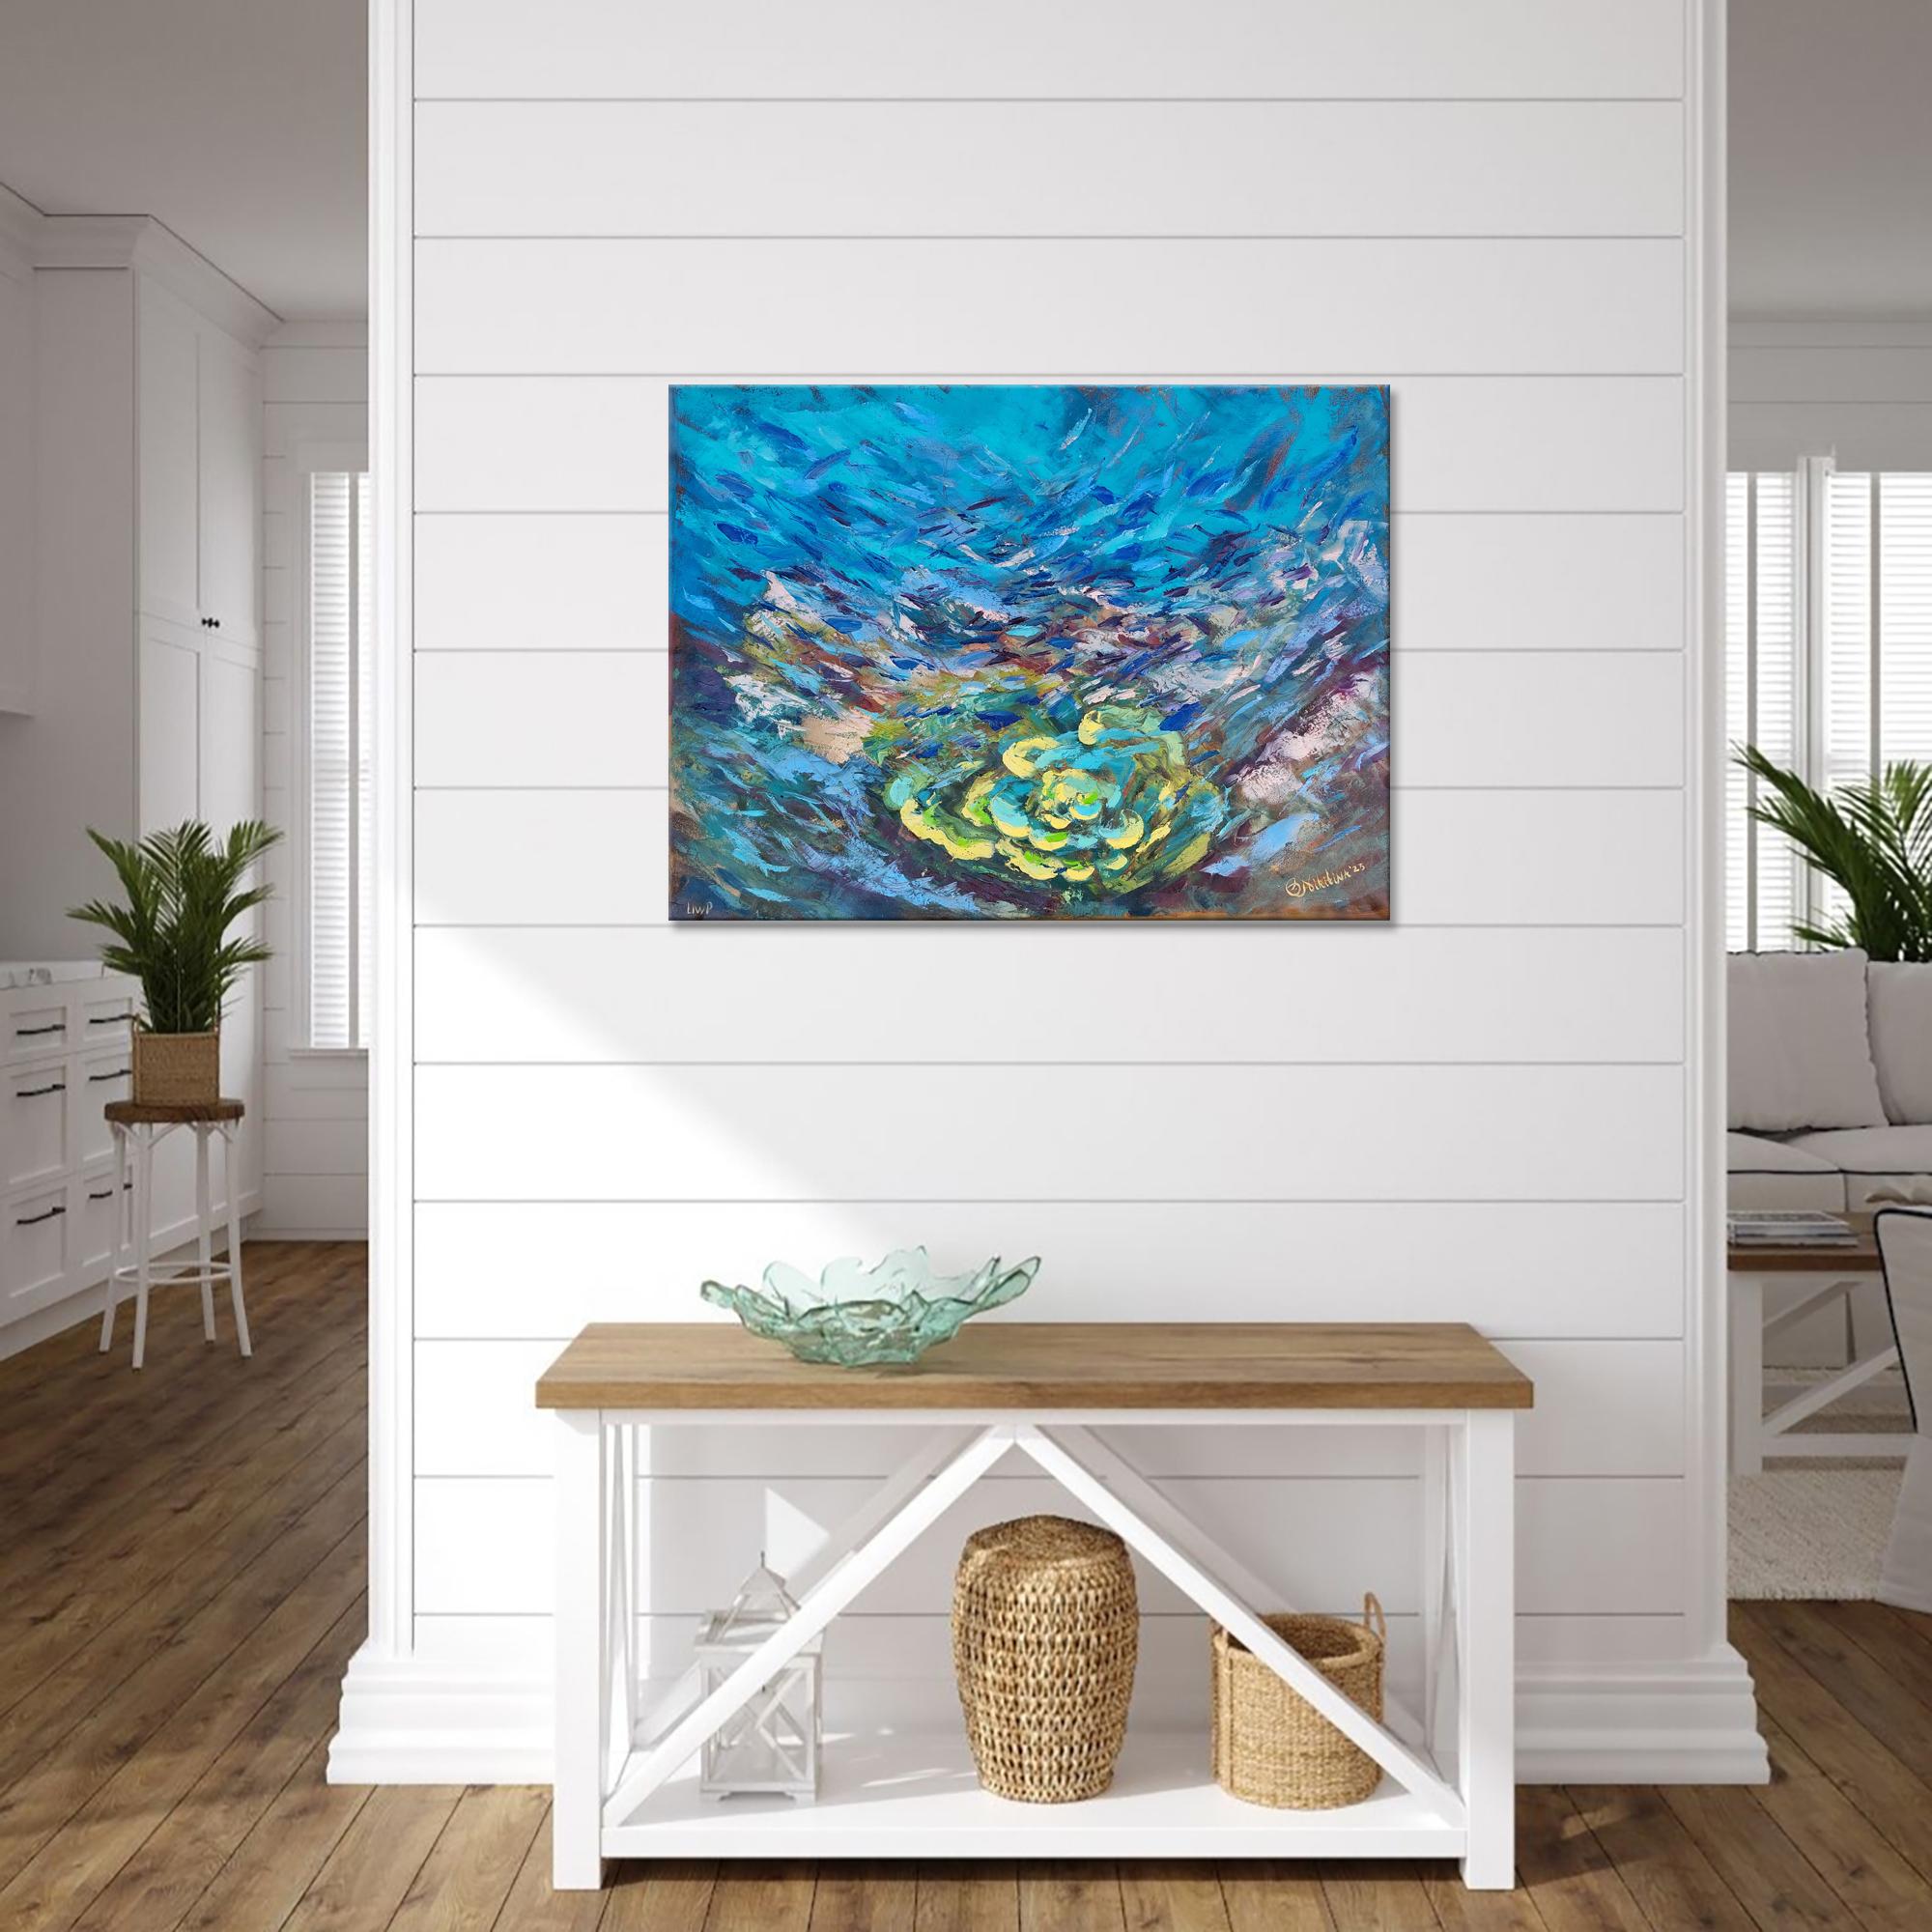 Underwater painting is a new fast growing direction in contemporary art. 
Original Art Soft Coral was crated underwater at the depth of  7.6 meters, underwater painting session 76 minutes during scuba diving.
Meterials: oil on cotton canvas, palette